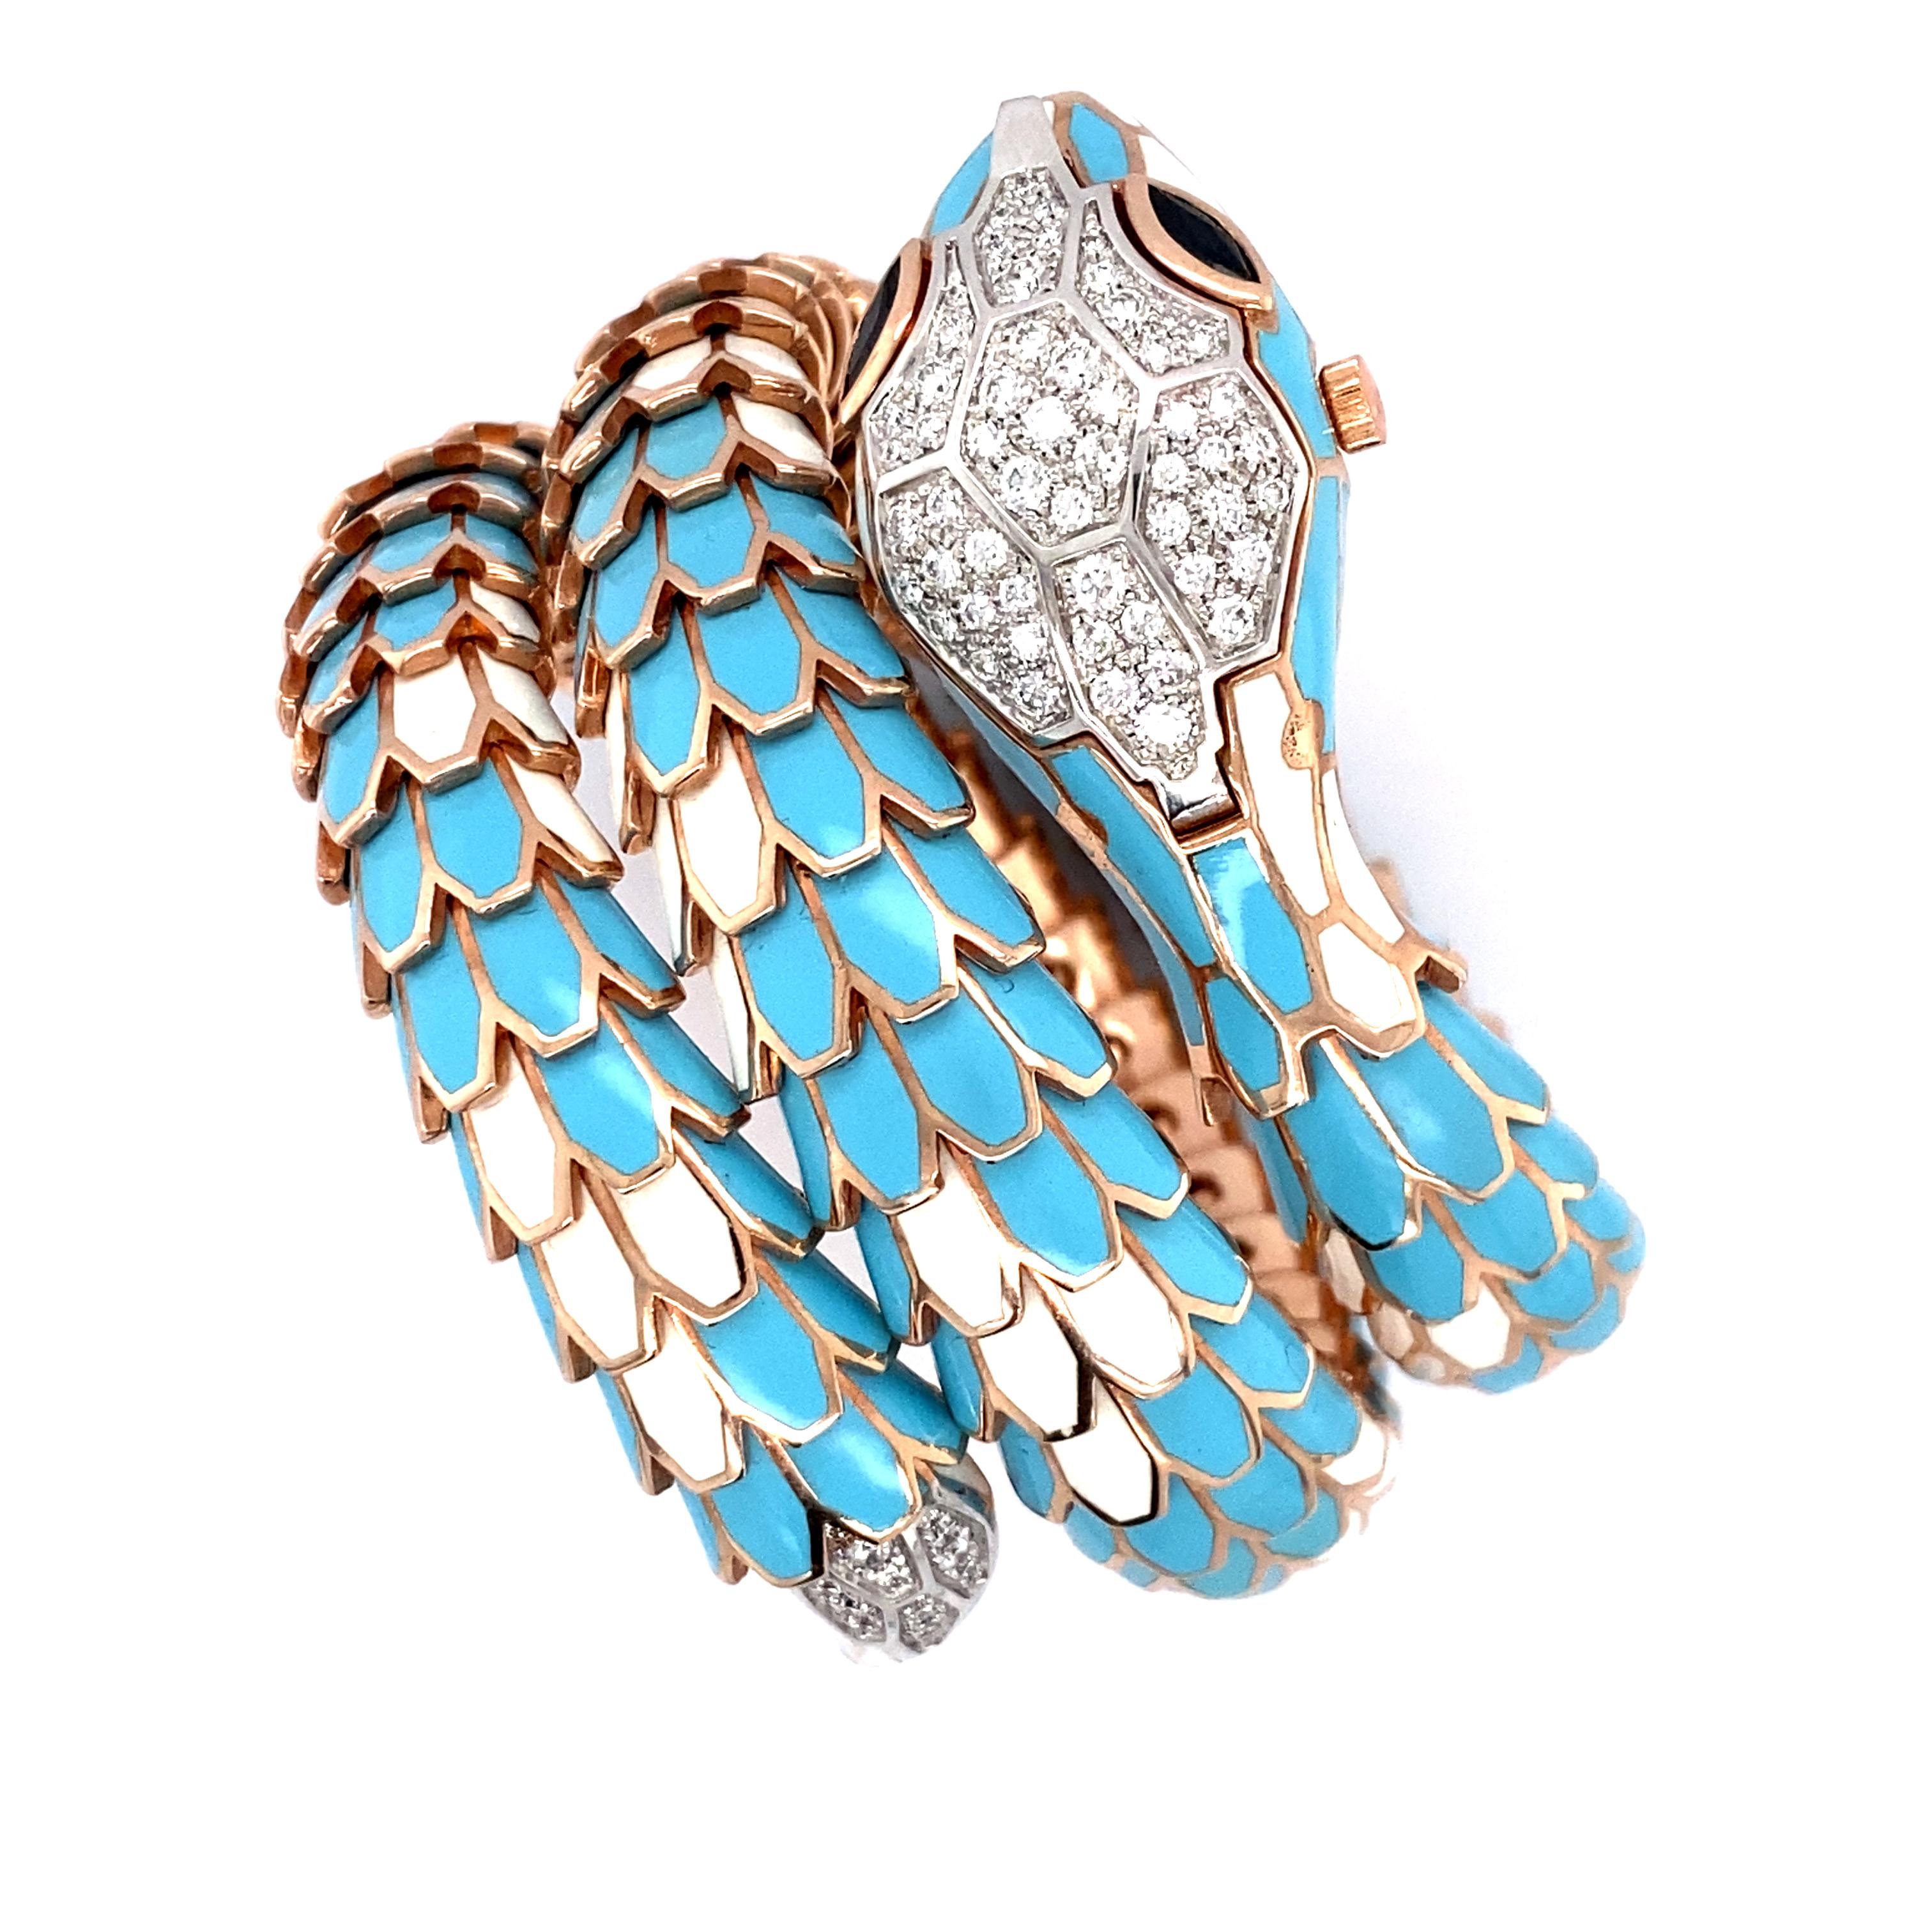 AN 18K ROSE GOLD, STERLING SILVER, ENAMEL, SAPPHIRE AND DIAMOND WRISTWATCH BANGLE, ITALY
Designed as a snake, with a hidden dial beneath the snake's head, the eyes set with marquise-shaped sapphires, the scales topped with light blue enamel, further